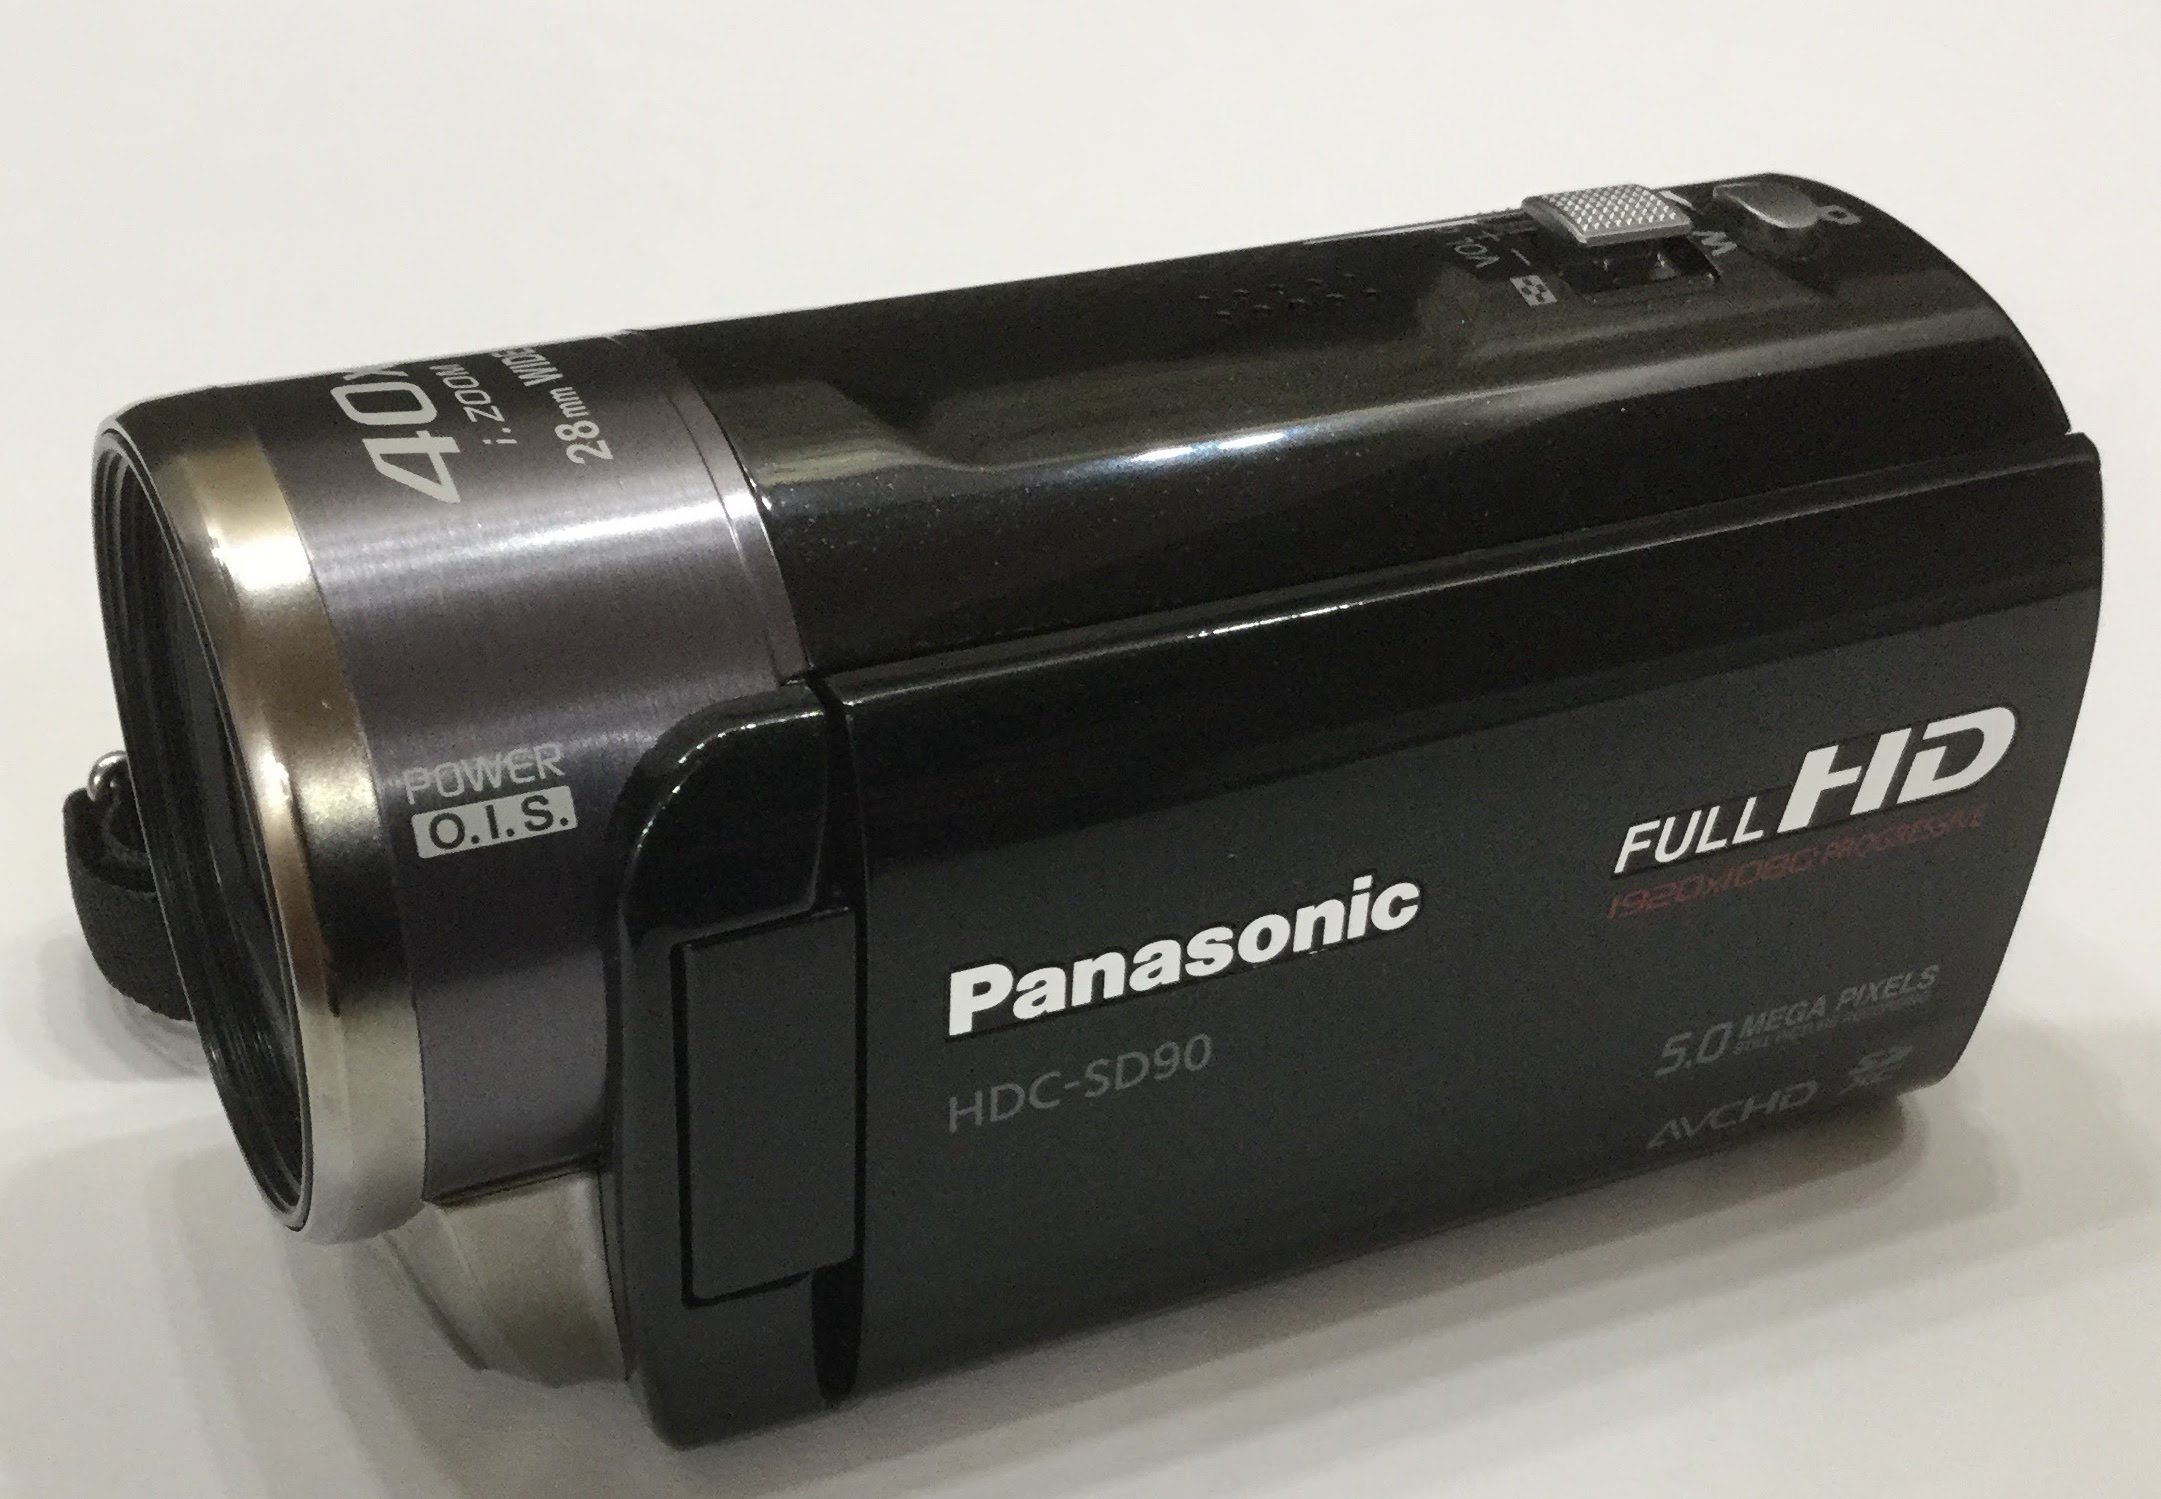 Panasonic HDC-SD90K 3D Compatible SD Memory Camcorder (Black) (Discontinued by Manufacturer)